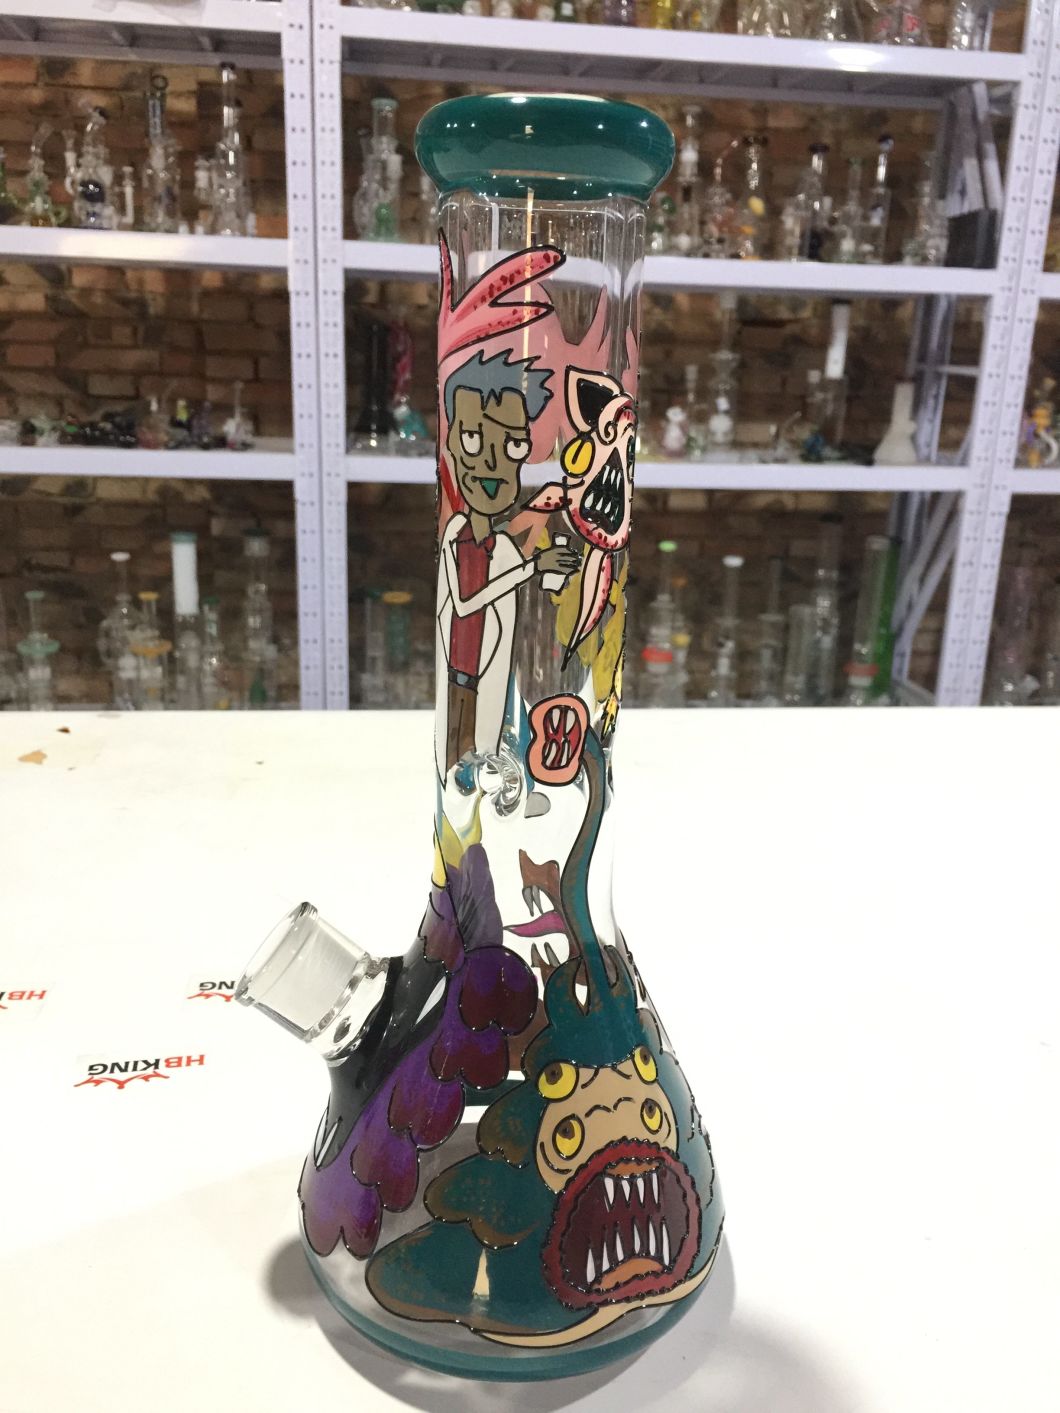 Latest Design Enjoylife 2016 Popular Rocket Inline Percolator Water Pipe with Cheap Price Rick and Morty Beaker